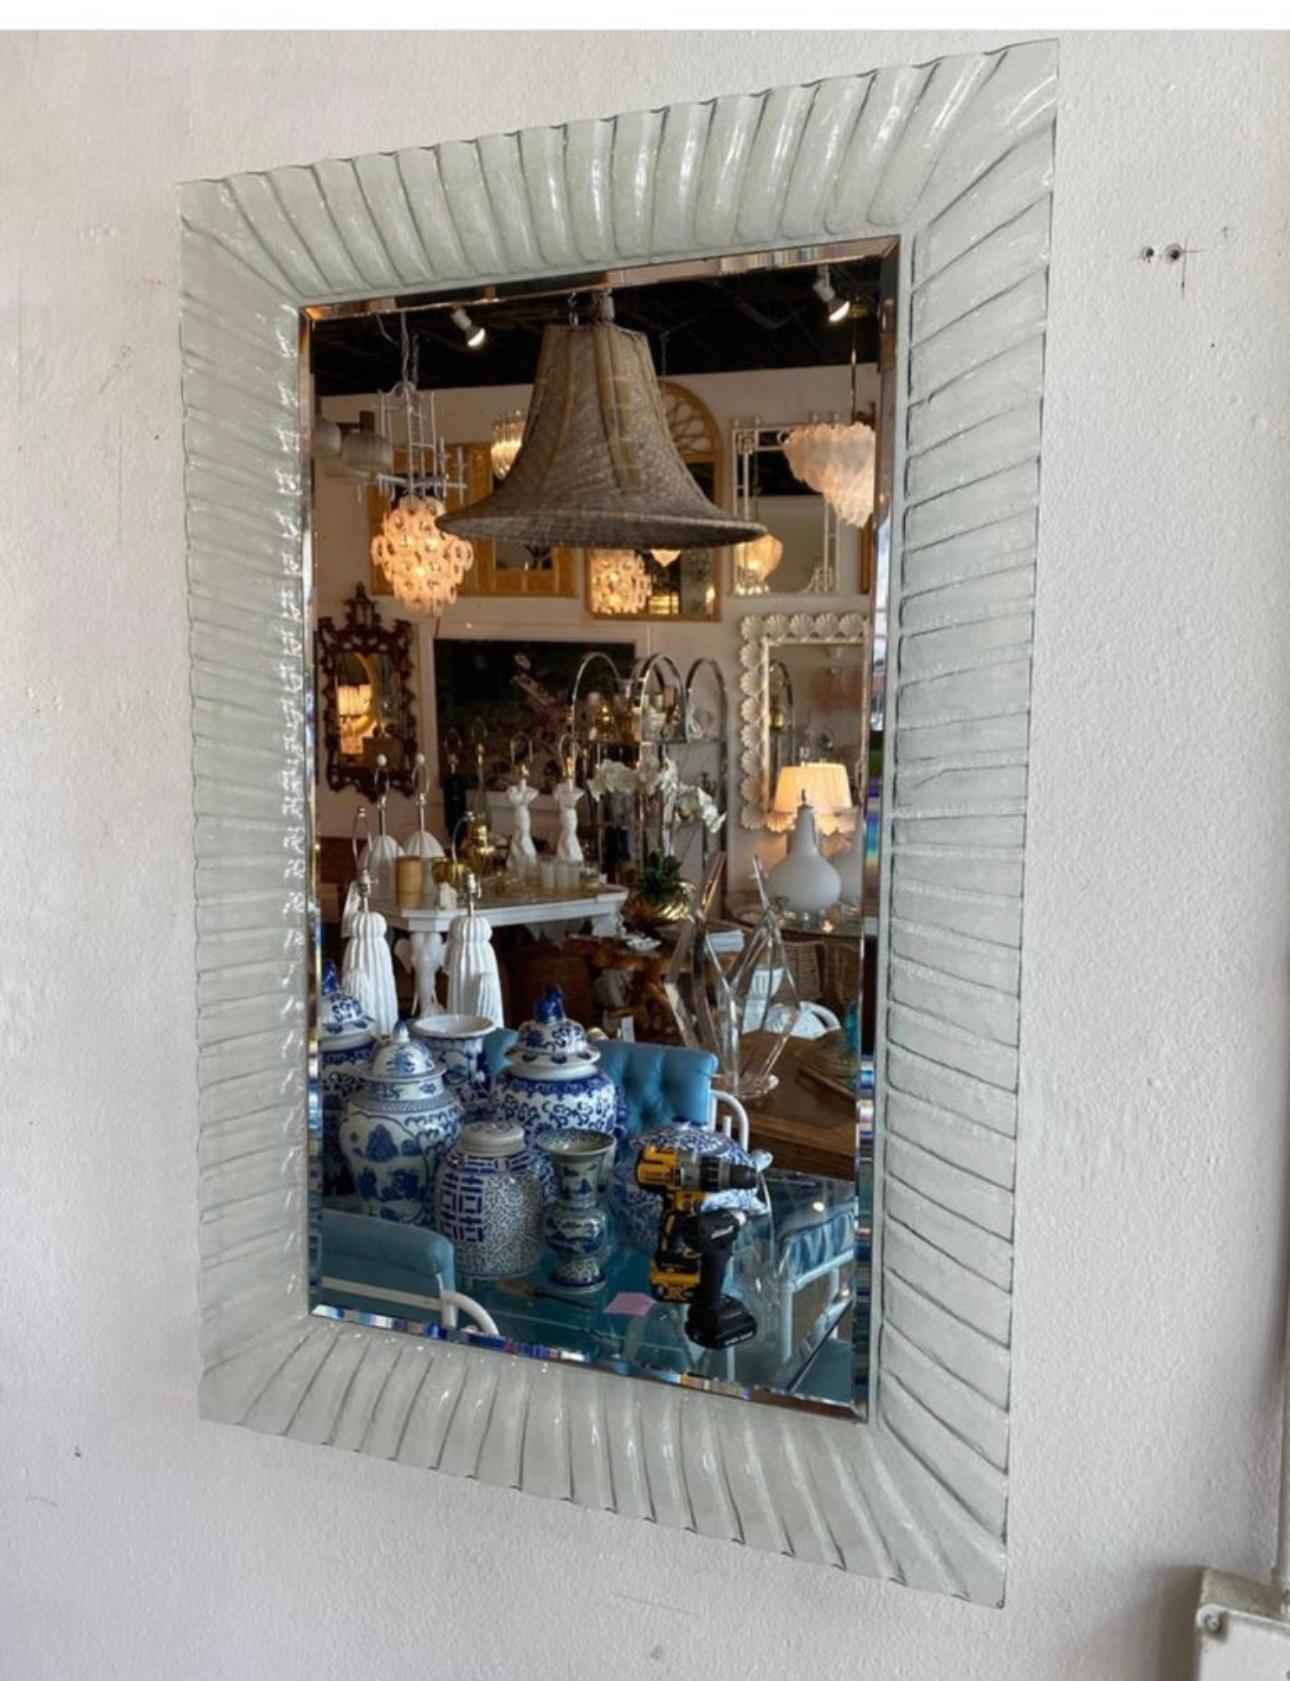 Lovely pair of vintage Murano glass mirrors. No chips or breaks to the glass. The entire mirror, including the back, is one piece of glass. This comes with a French cleat to mount both mirrors. The sides are wavy and have such a beautiful shape to